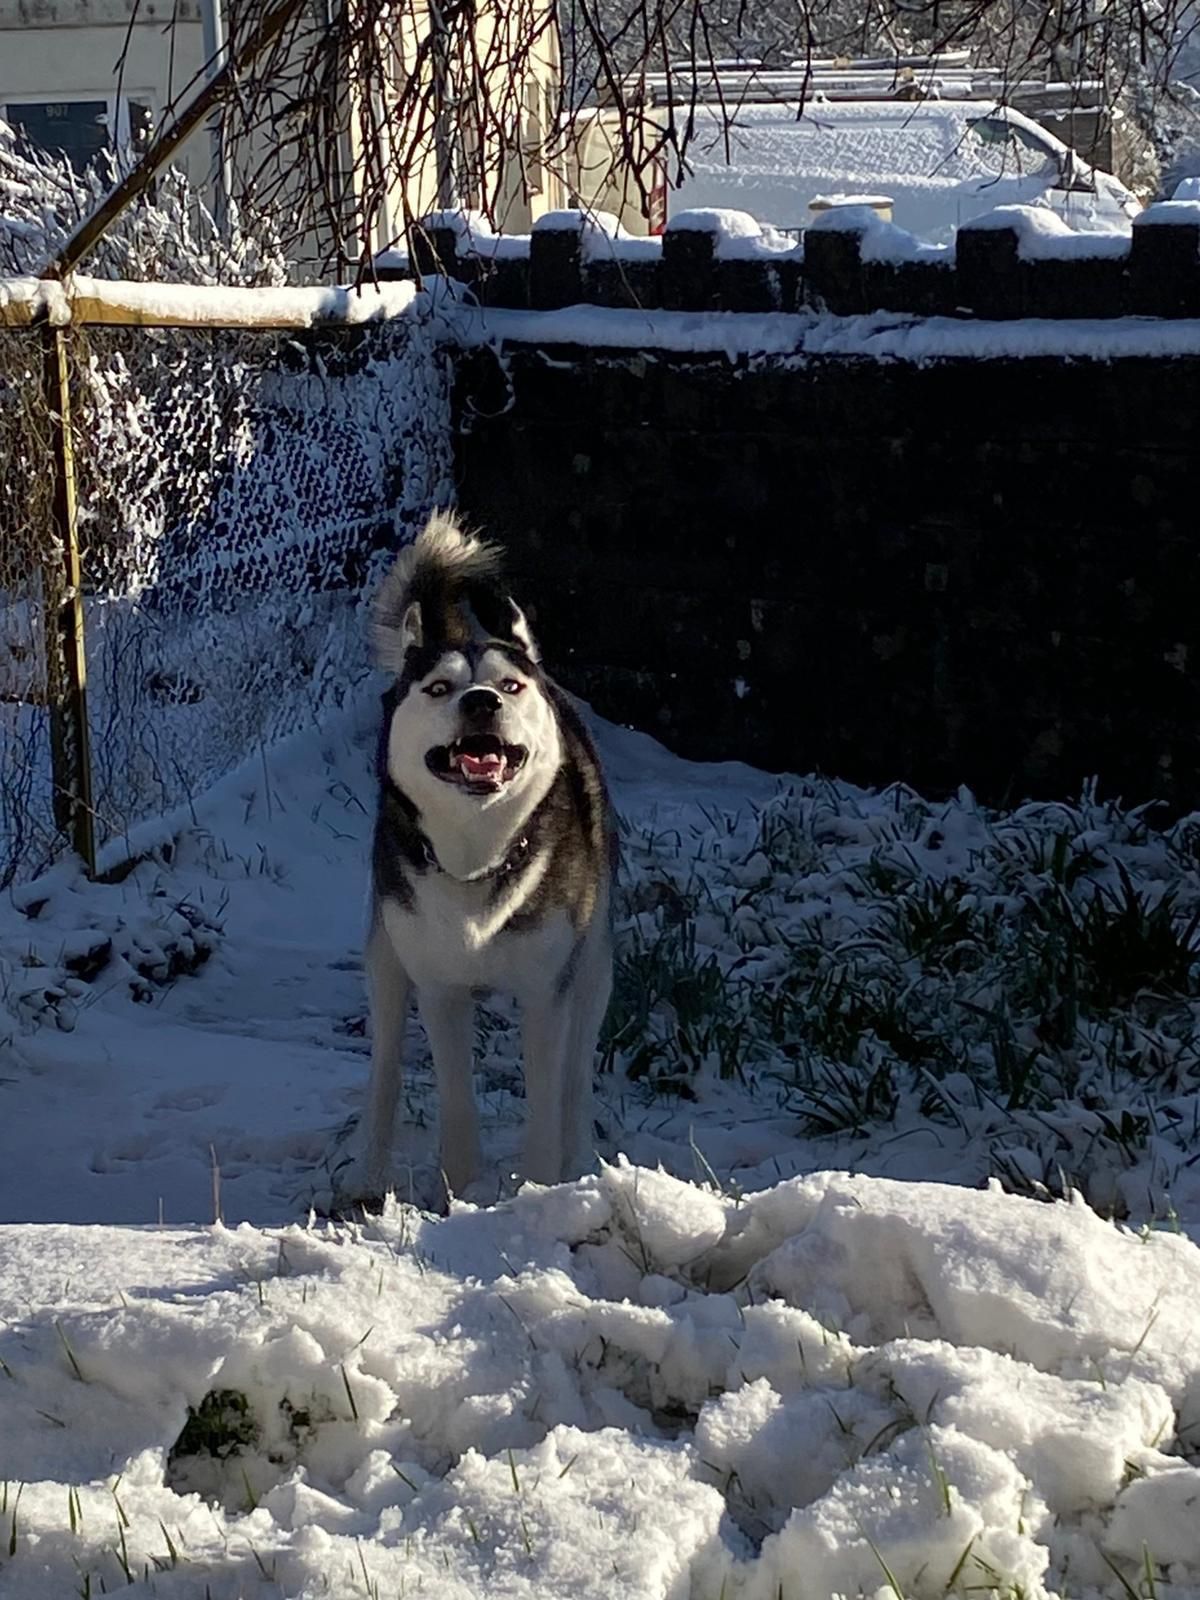 My Siberian husky’s first time in the snow! Look how happy he is